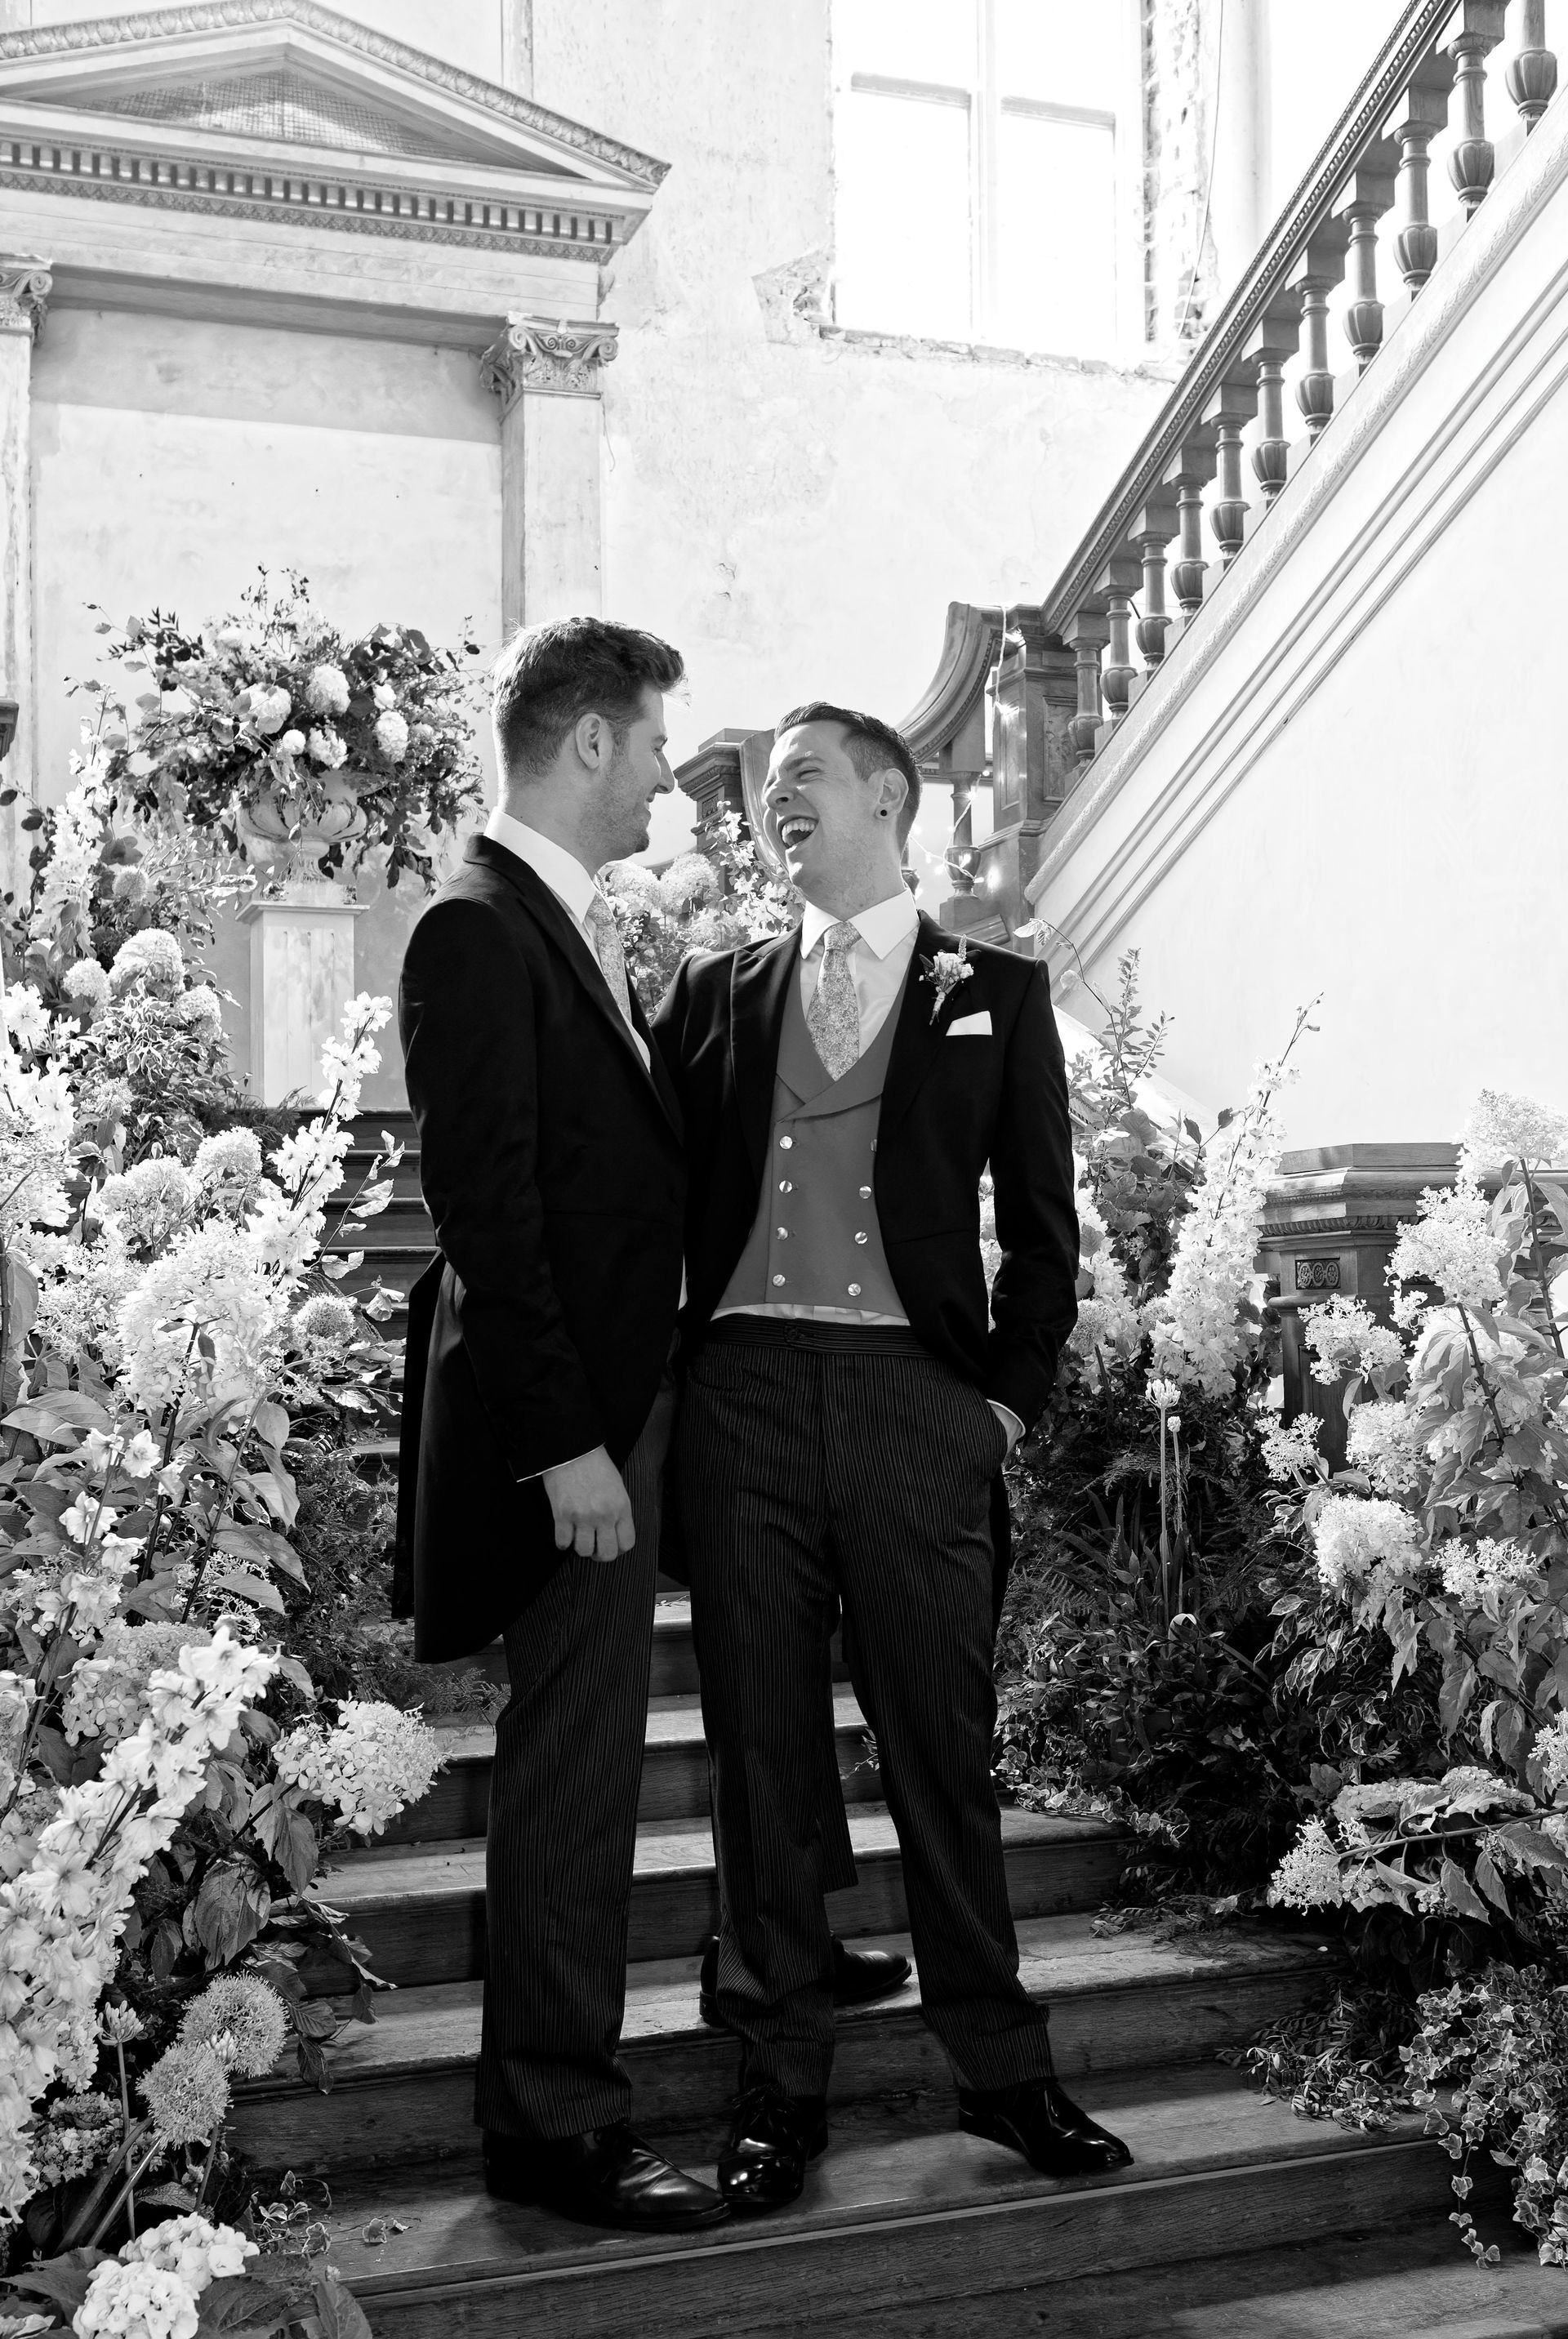 gay wedding photography of two men in suits are standing next to each other on a set of stairs .